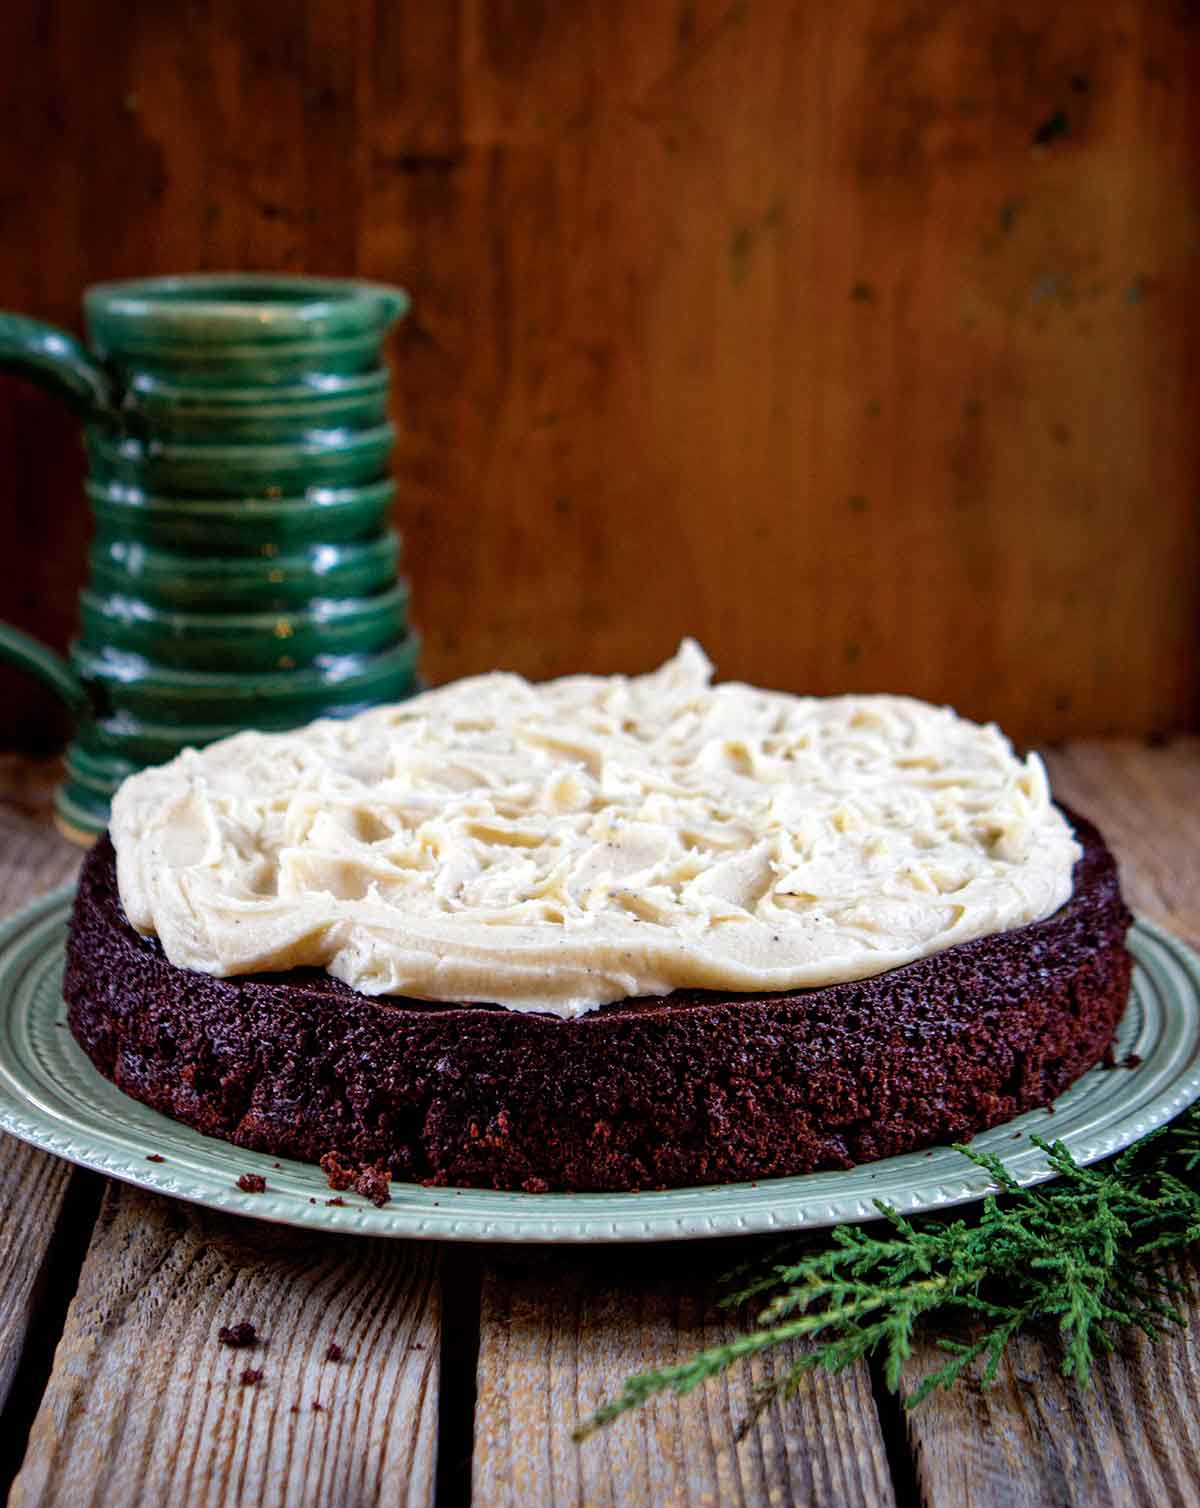 A chocolate stout cake with brown butter cream cheese frosting on a green plate with a green mug in the background.